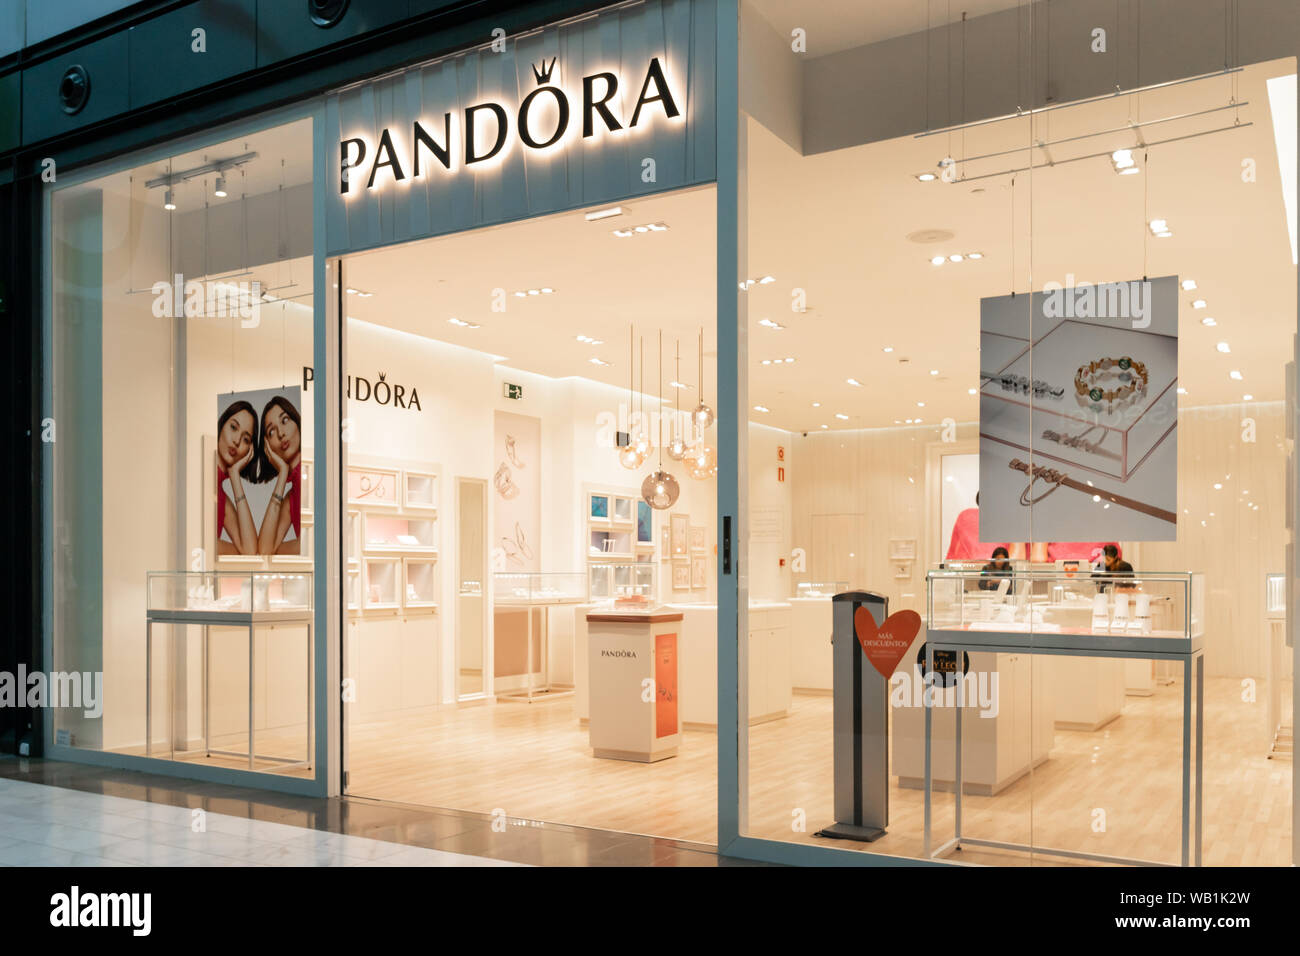 Pandora Jewellery Store High Resolution Stock Photography and Images - Alamy